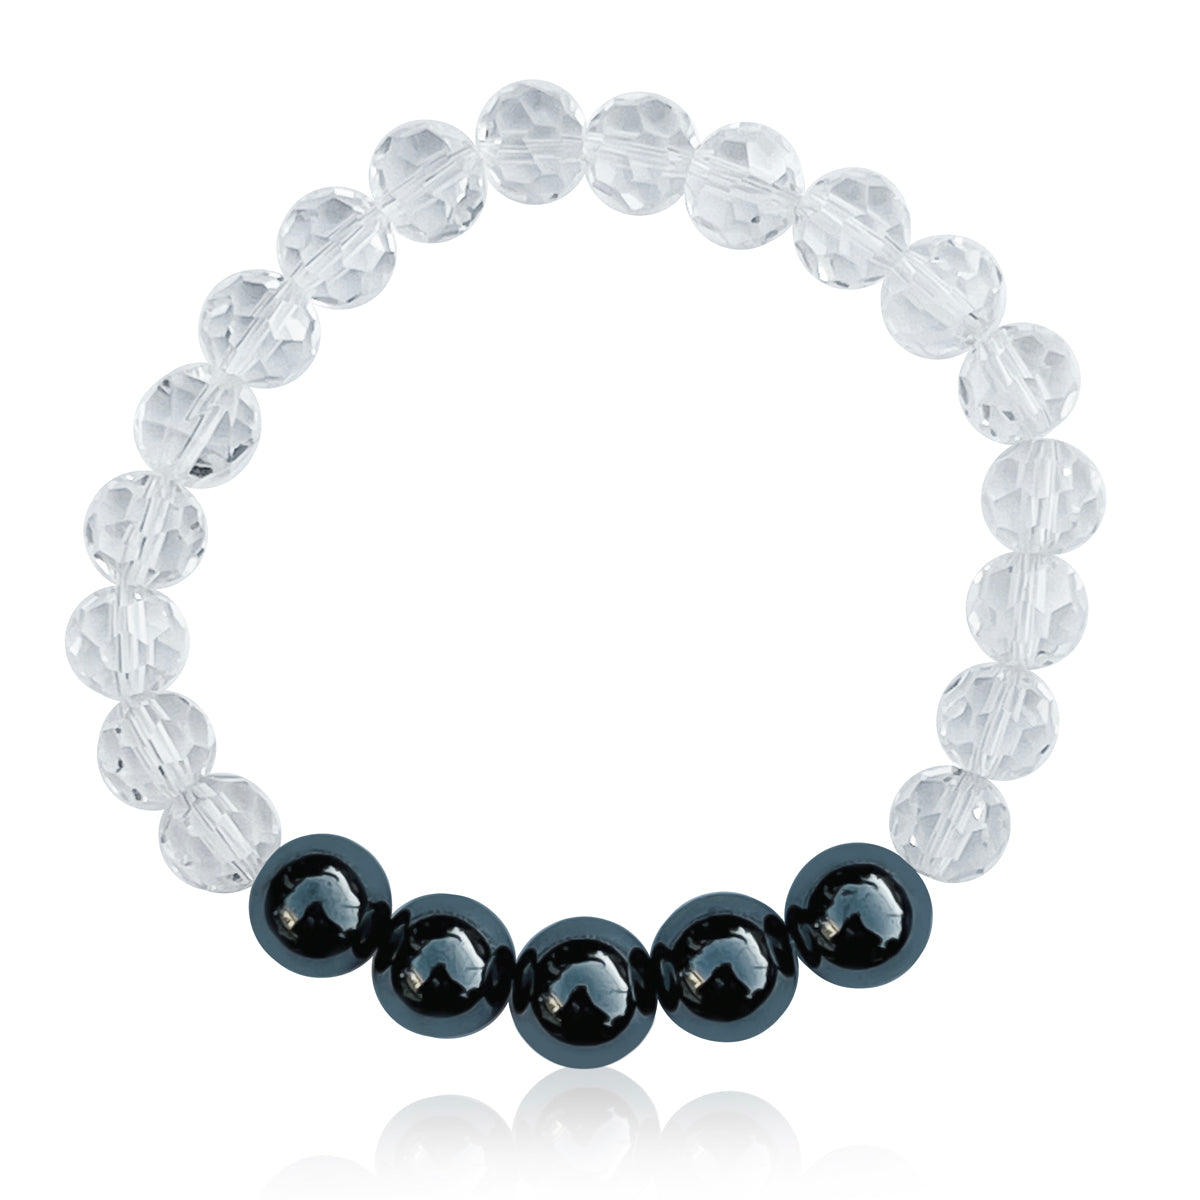 Hematite and Crystal Bracelet to Help Unwind. Clear Quartz is known as the “master healer” and will amplify energy and thought, as well as the effect of other crystals. It absorbs, stores, releases and regulates energy. Hematite has an excellent grounding and balancing energy. 